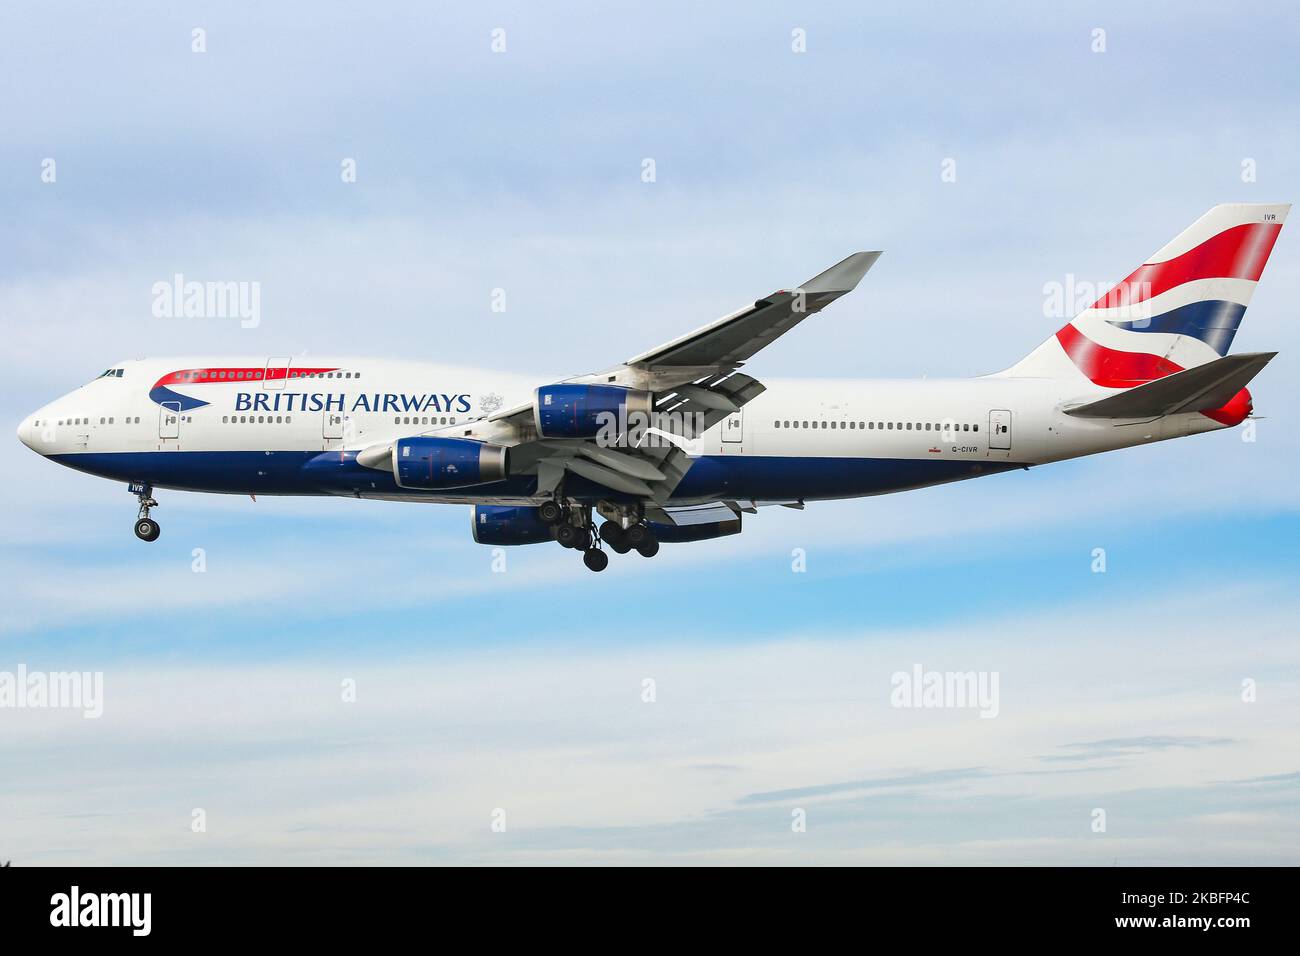 British Airways Boeing 747-400 with nickname Queen of the Skies commercial aircraft as seen on final approach with landing gear down landing at New York JFK John F. Kennedy International Airport in USA on 23 January 2020. The jumbo jet wide-body long haul airplane has the registration G-CIVR with 4x RR engines. BA is connecting capital of UK London LHR to New York City via Transatlantic flight. BAW Speedbird is the flag carrier airline of the United Kingdom member of Oneworld aviation alliance. NY, USA (Photo by Nicolas Economou/NurPhoto) Stock Photo